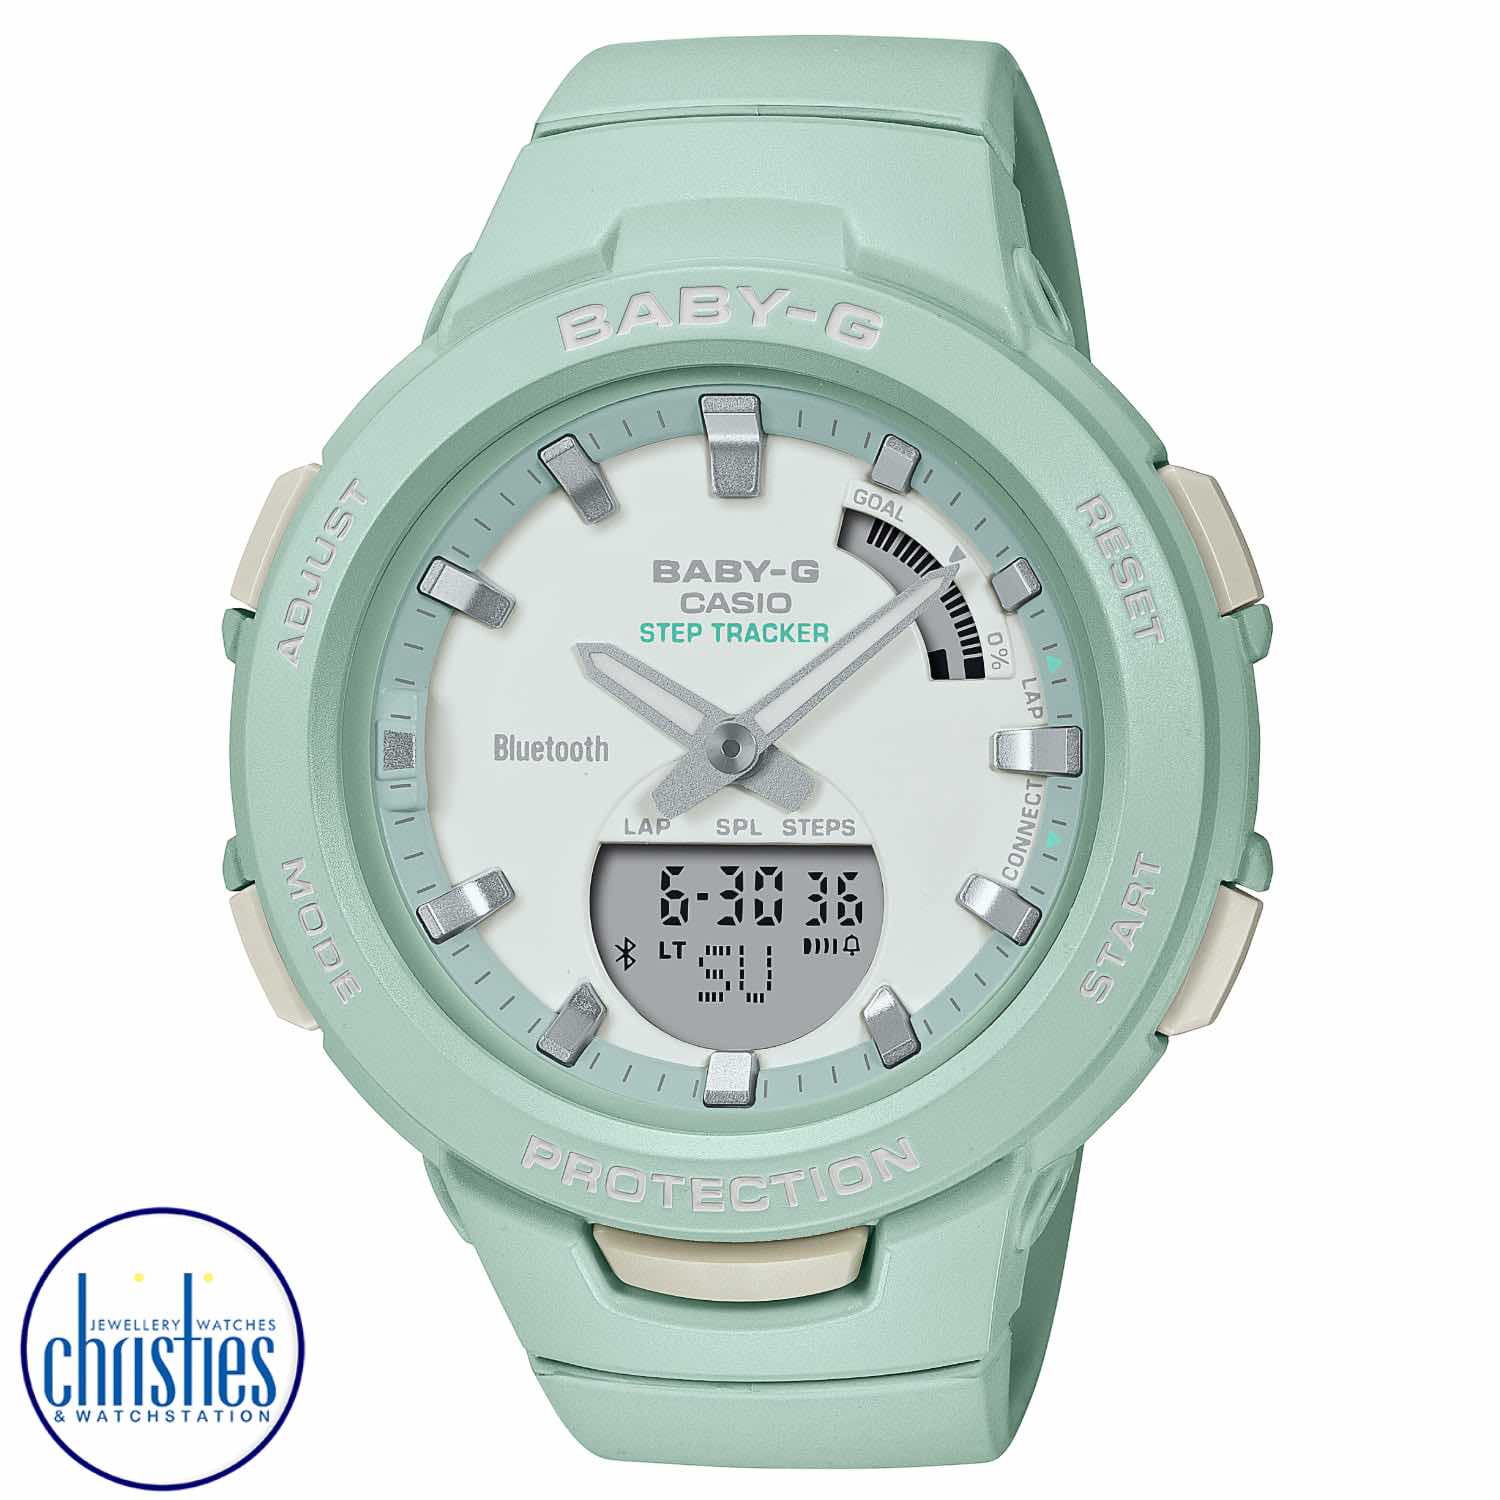 BSAB100CS-3A Casio Baby G-Squad Smartphone Link Watch. Indulge your love of BABY-G and your passion for working out with sports watches that sync with your mobile device to sweeten your daily workouts.